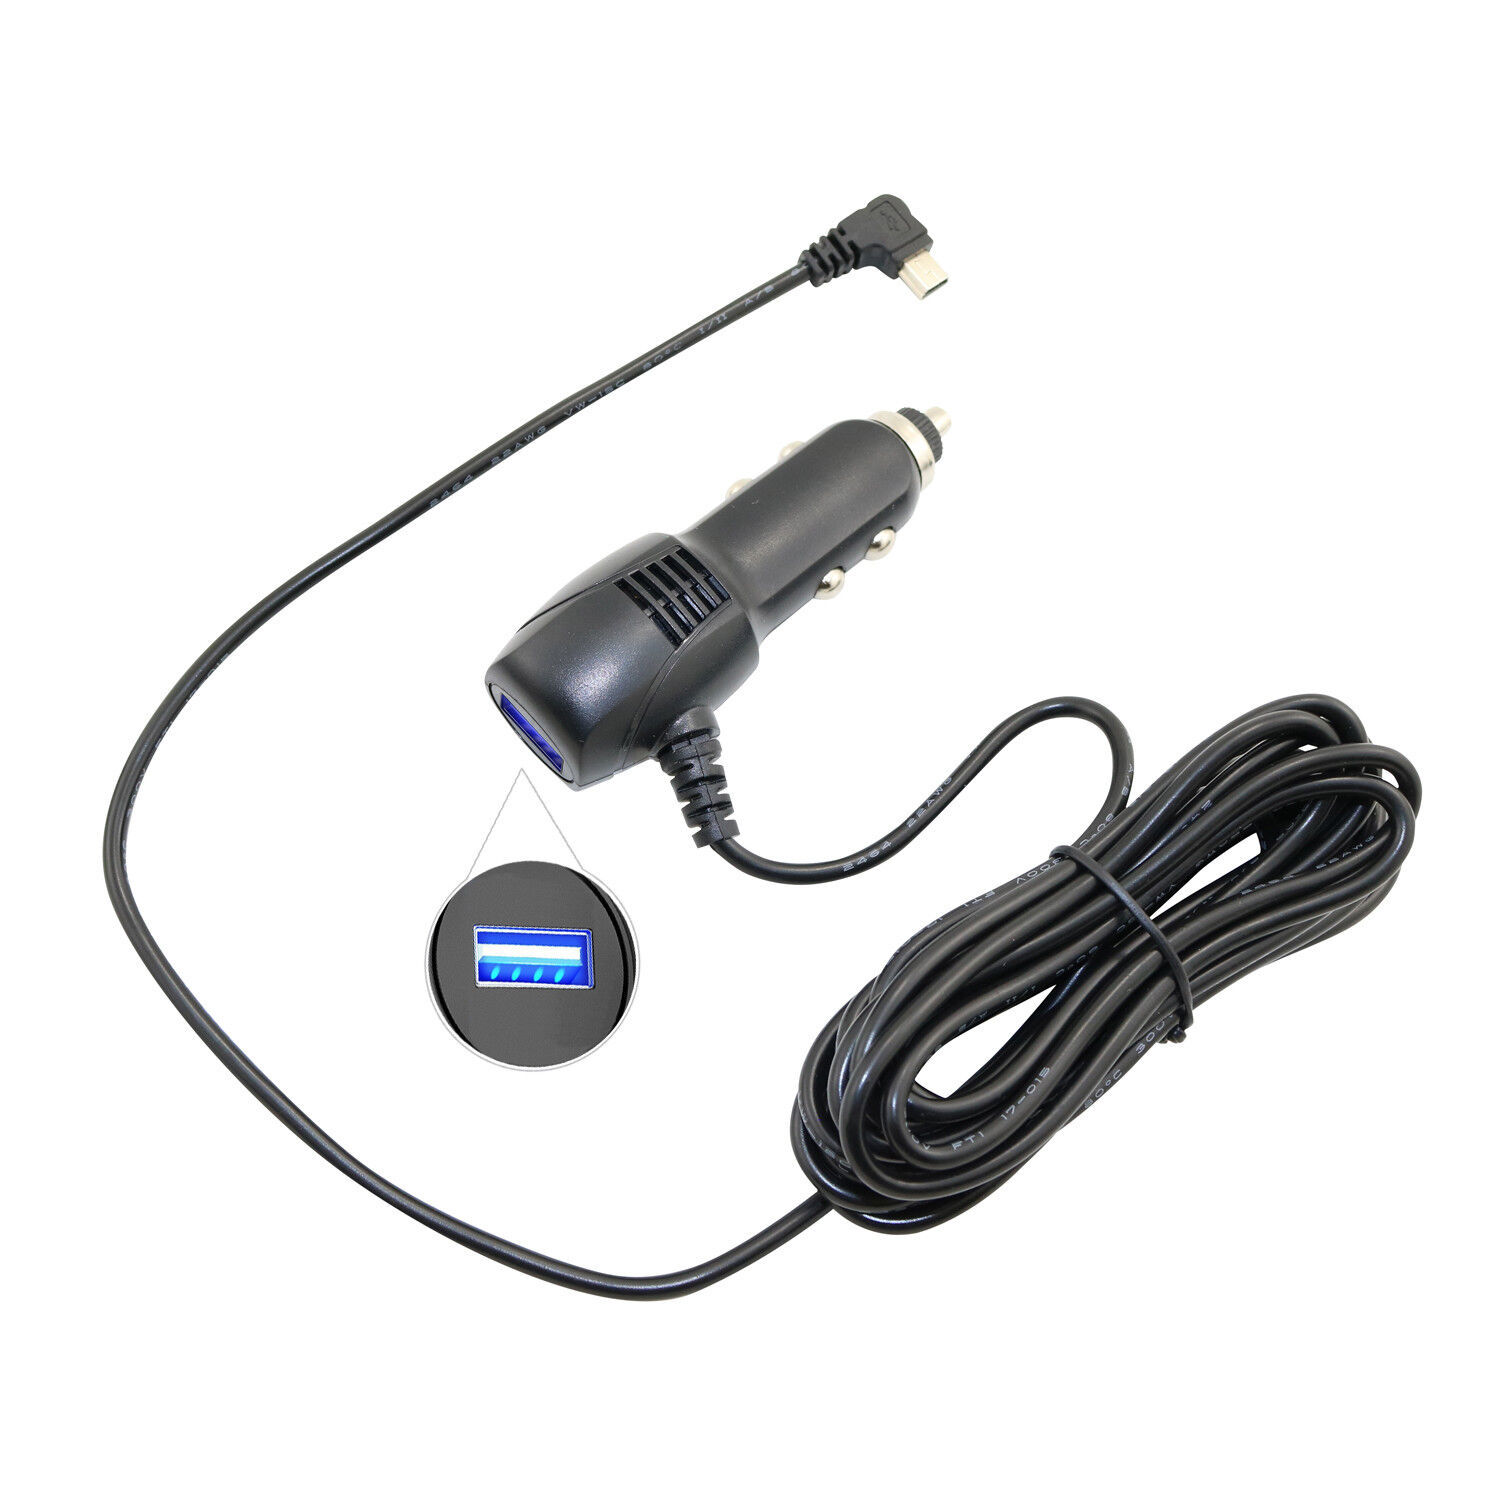 Primary image for 1 Usb Port Car Charger Adapter For Garmin Gps Nuvi 2797 Lm/T 2757 Lm/T Dezl Cam